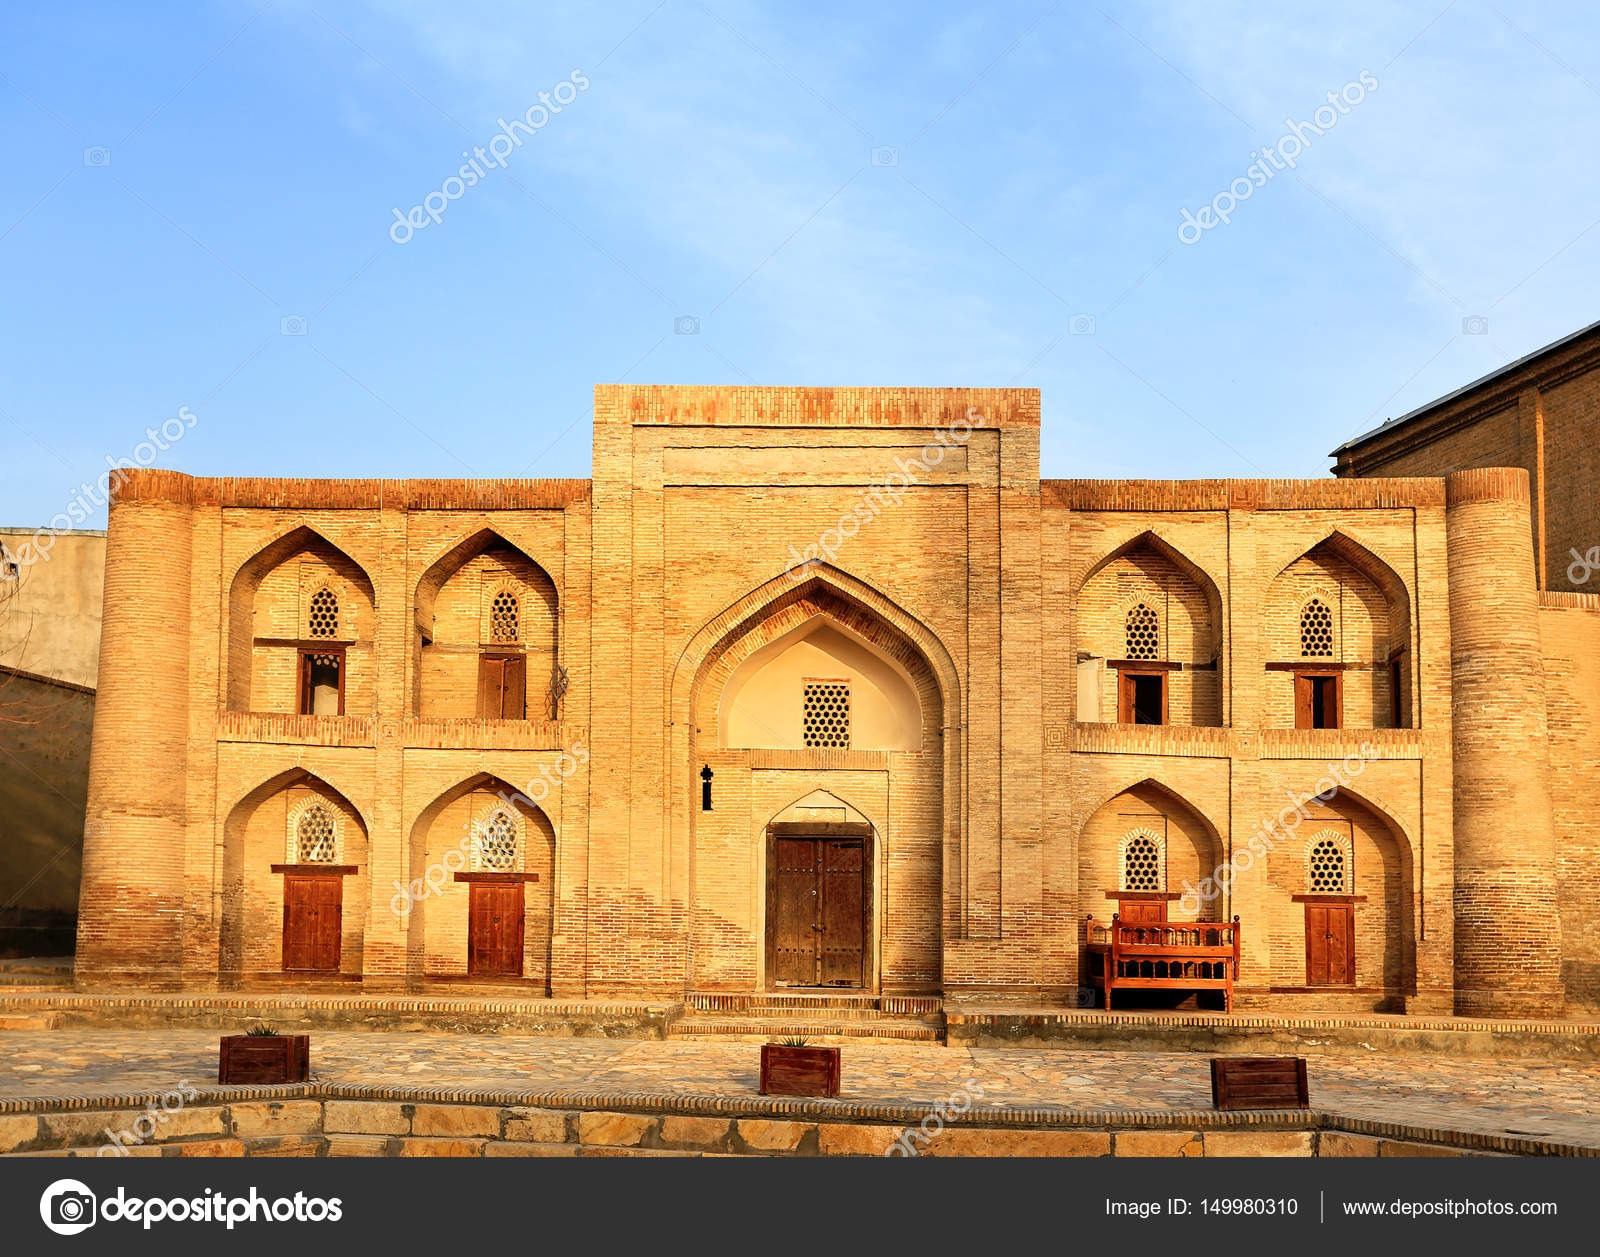 Medieval oriental structure — Stock Photo © pingvin121674 #149980310